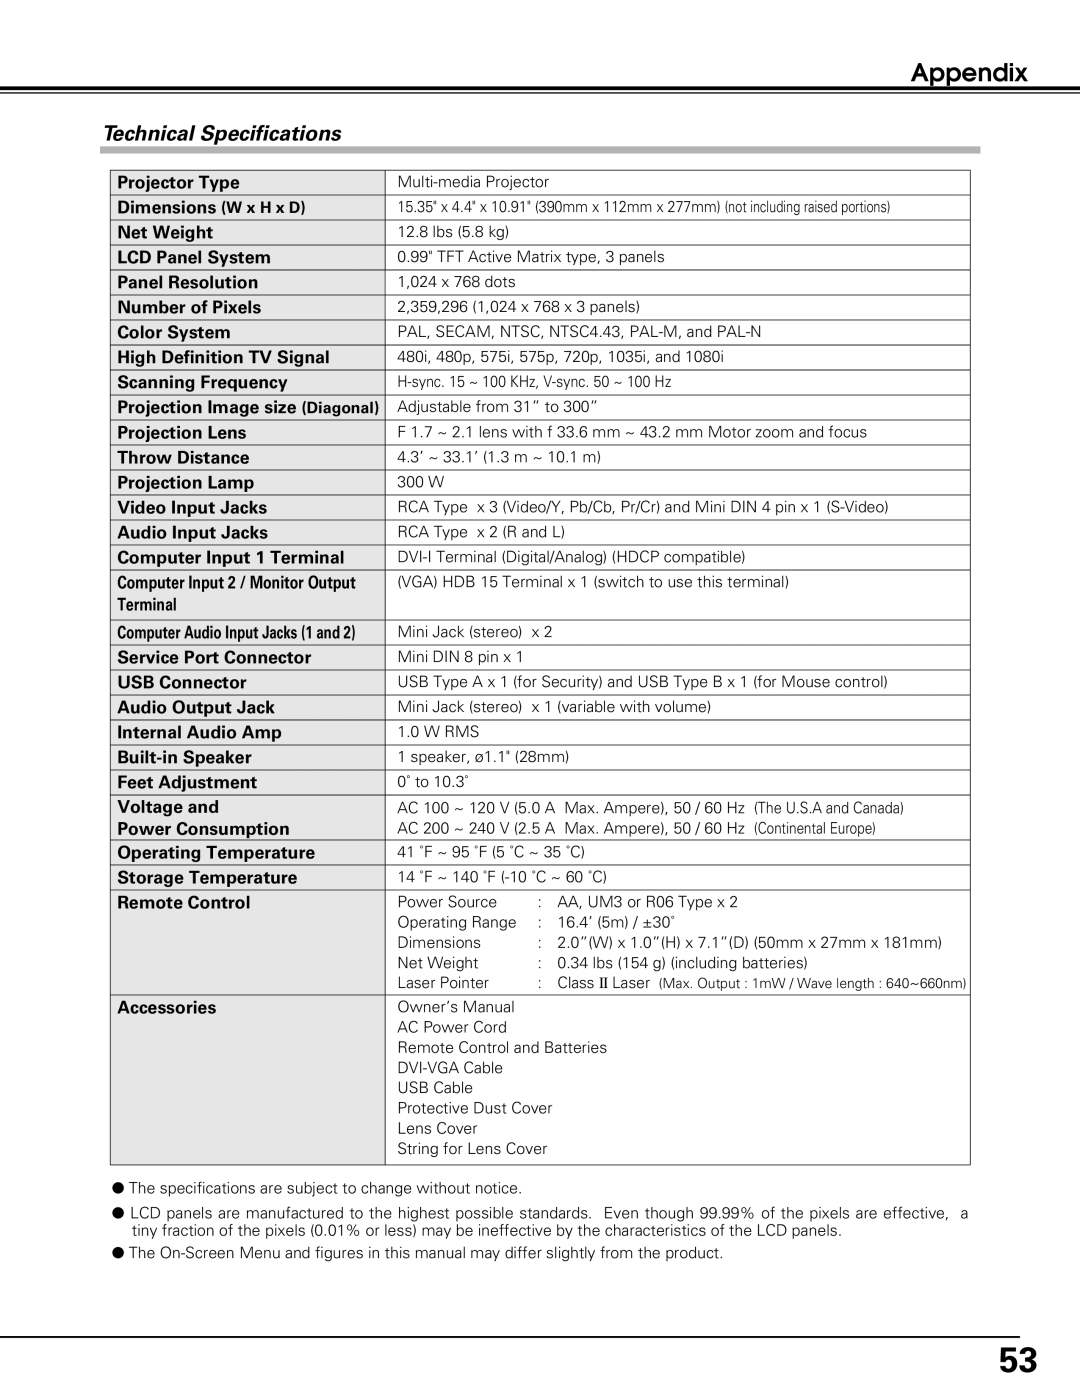 Eiki LC-XE10 instruction manual Technical Specifications, Appendix 